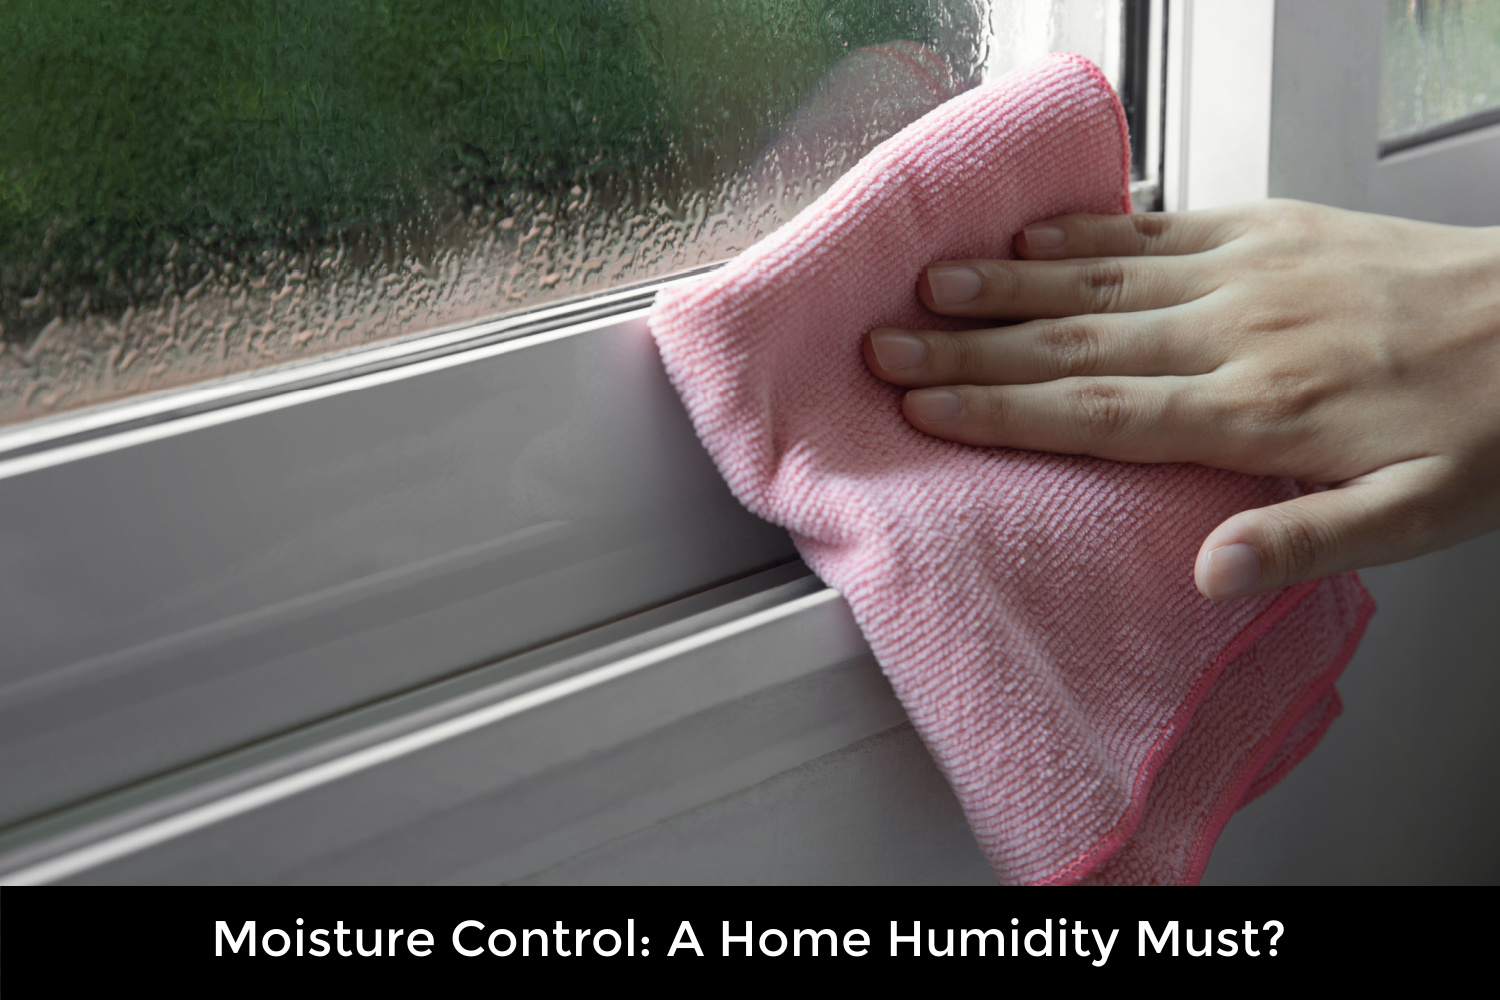 Moisture Control: A Home Humidity Must?